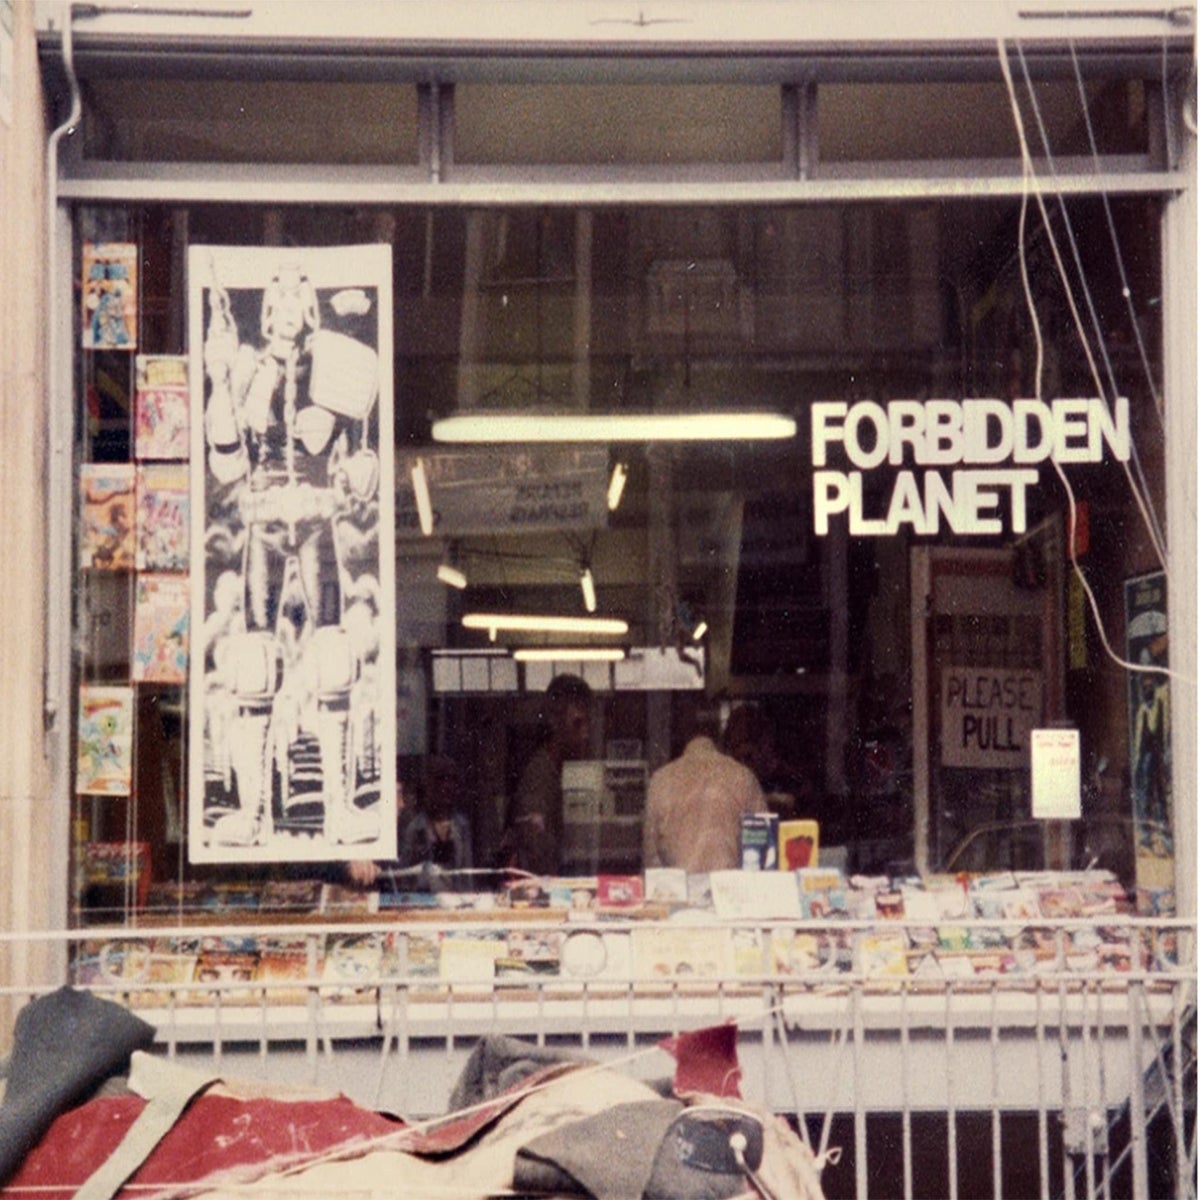 New York City's Forbidden Planet Comic Book Store Is Asking For Help